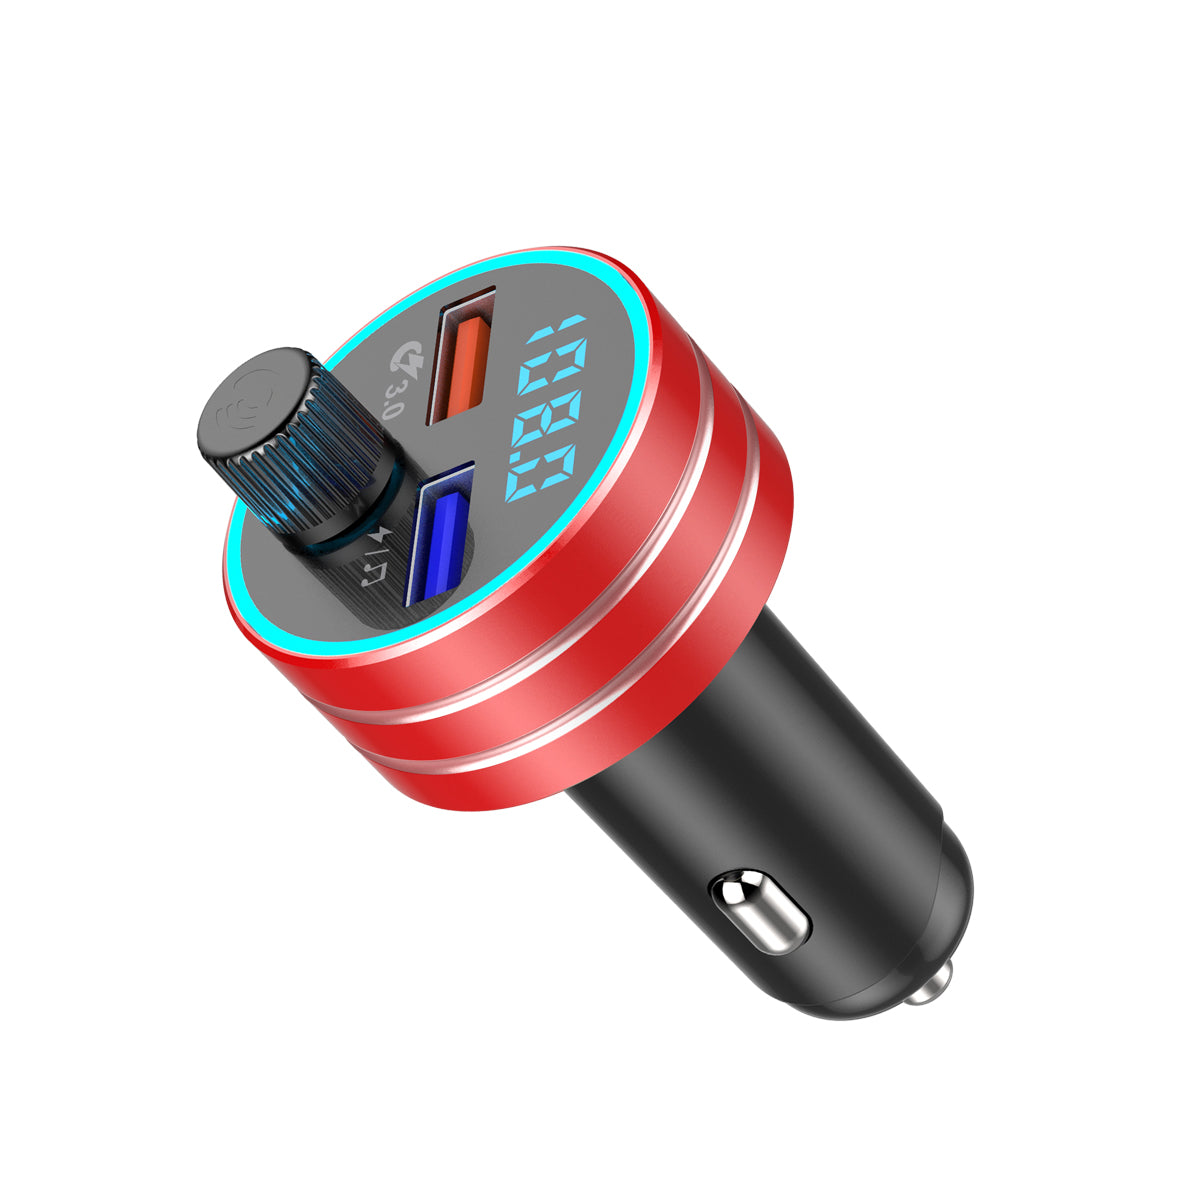 UUTEK RS-685 QC3.0 fast car charger dual USB fast and safe charging